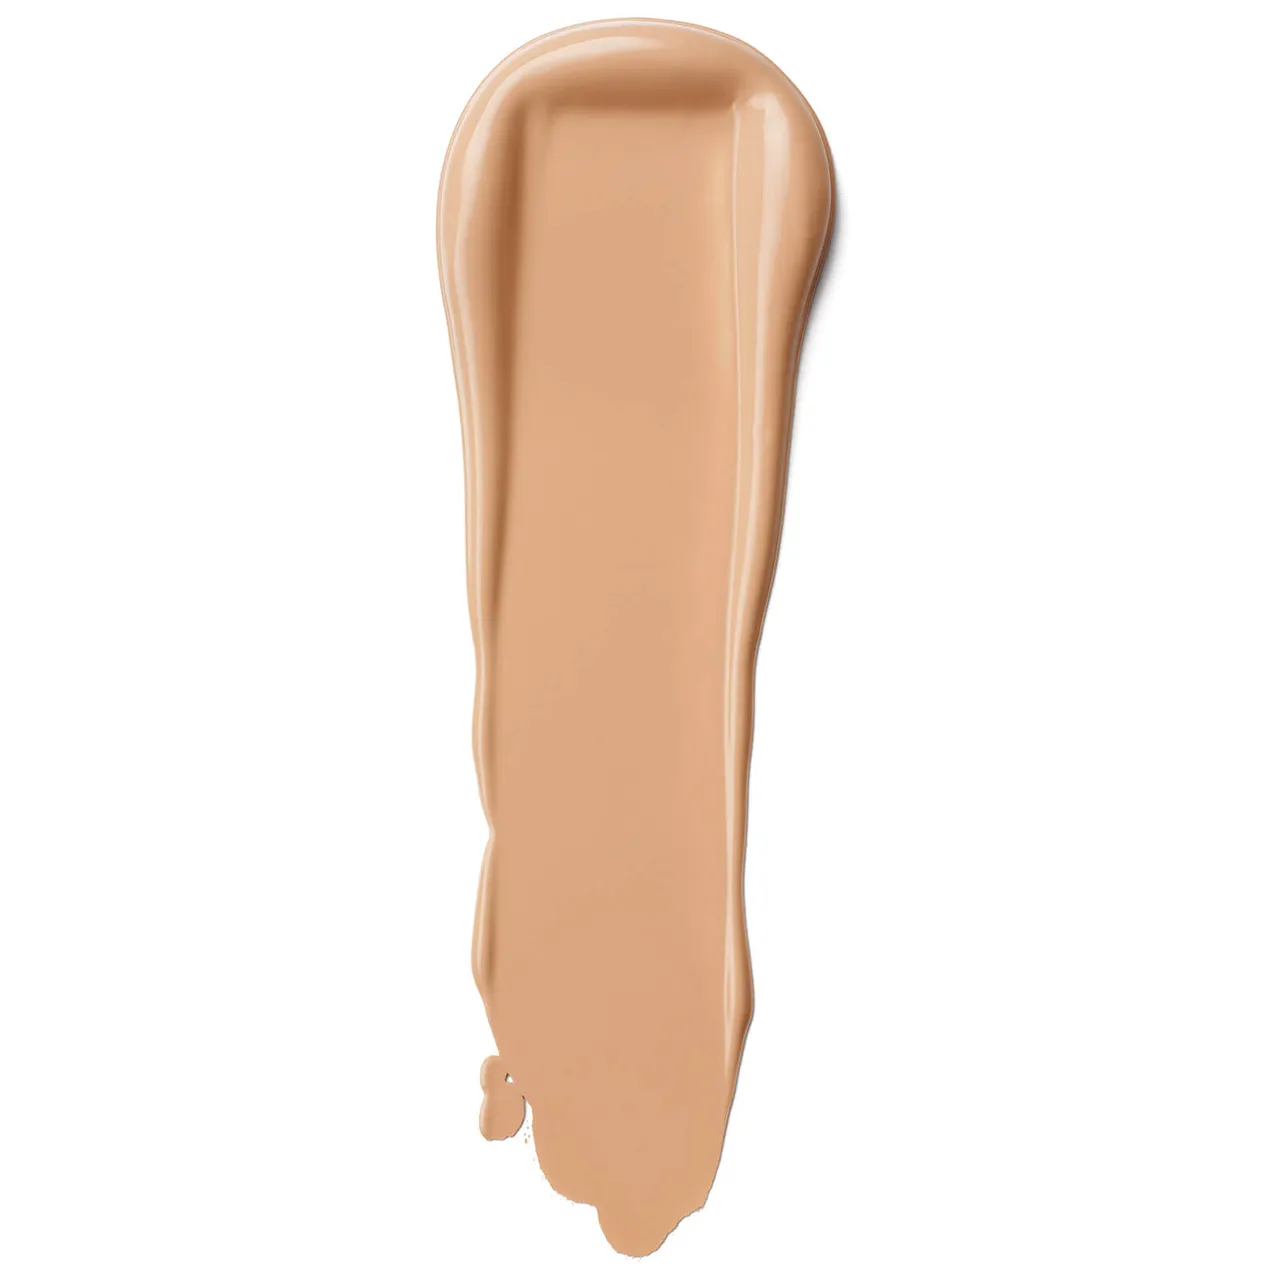 Clinique Beyond Perfecting Foundation and Concealer 30ml (Various Shades) - Neutral